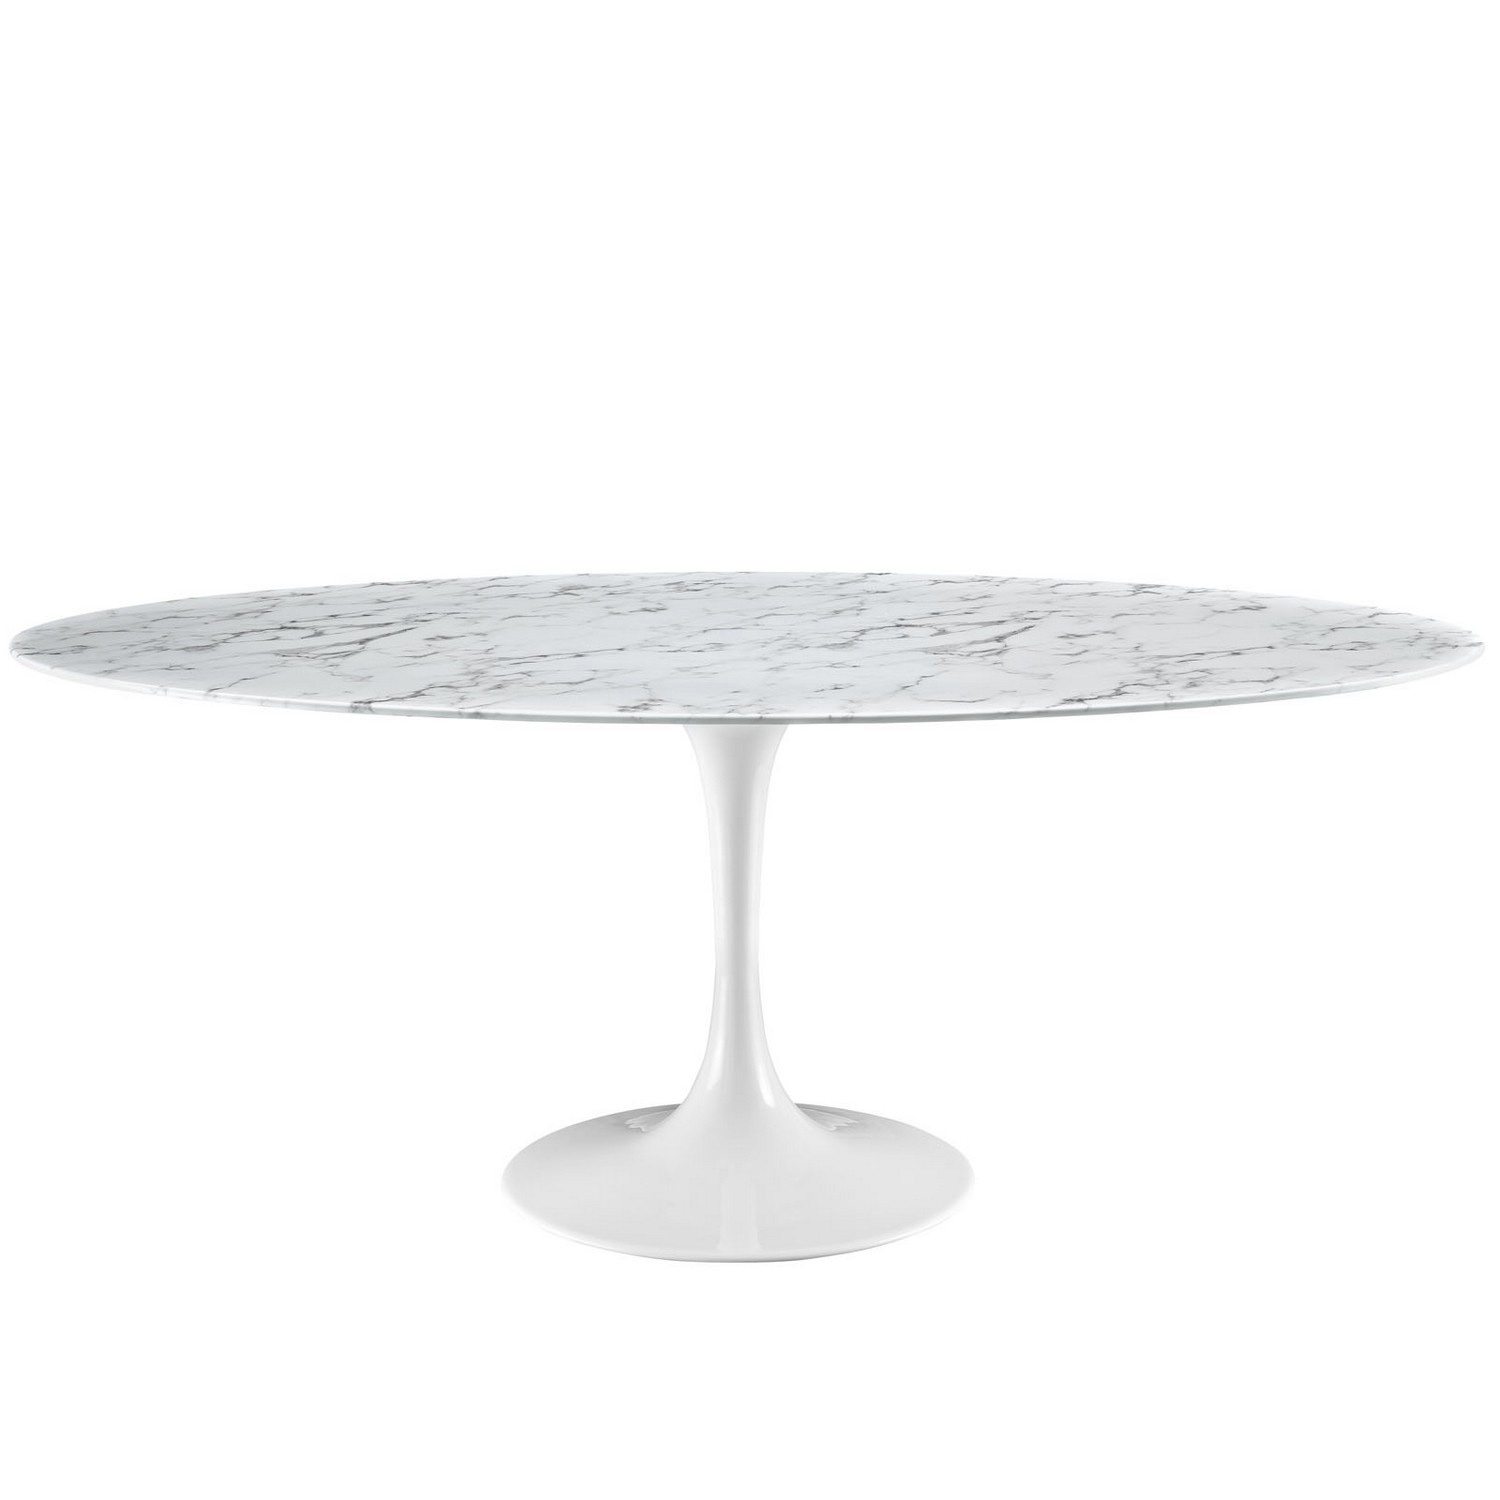 Modway Lippa 78 Artificial Marble Dining Table - White